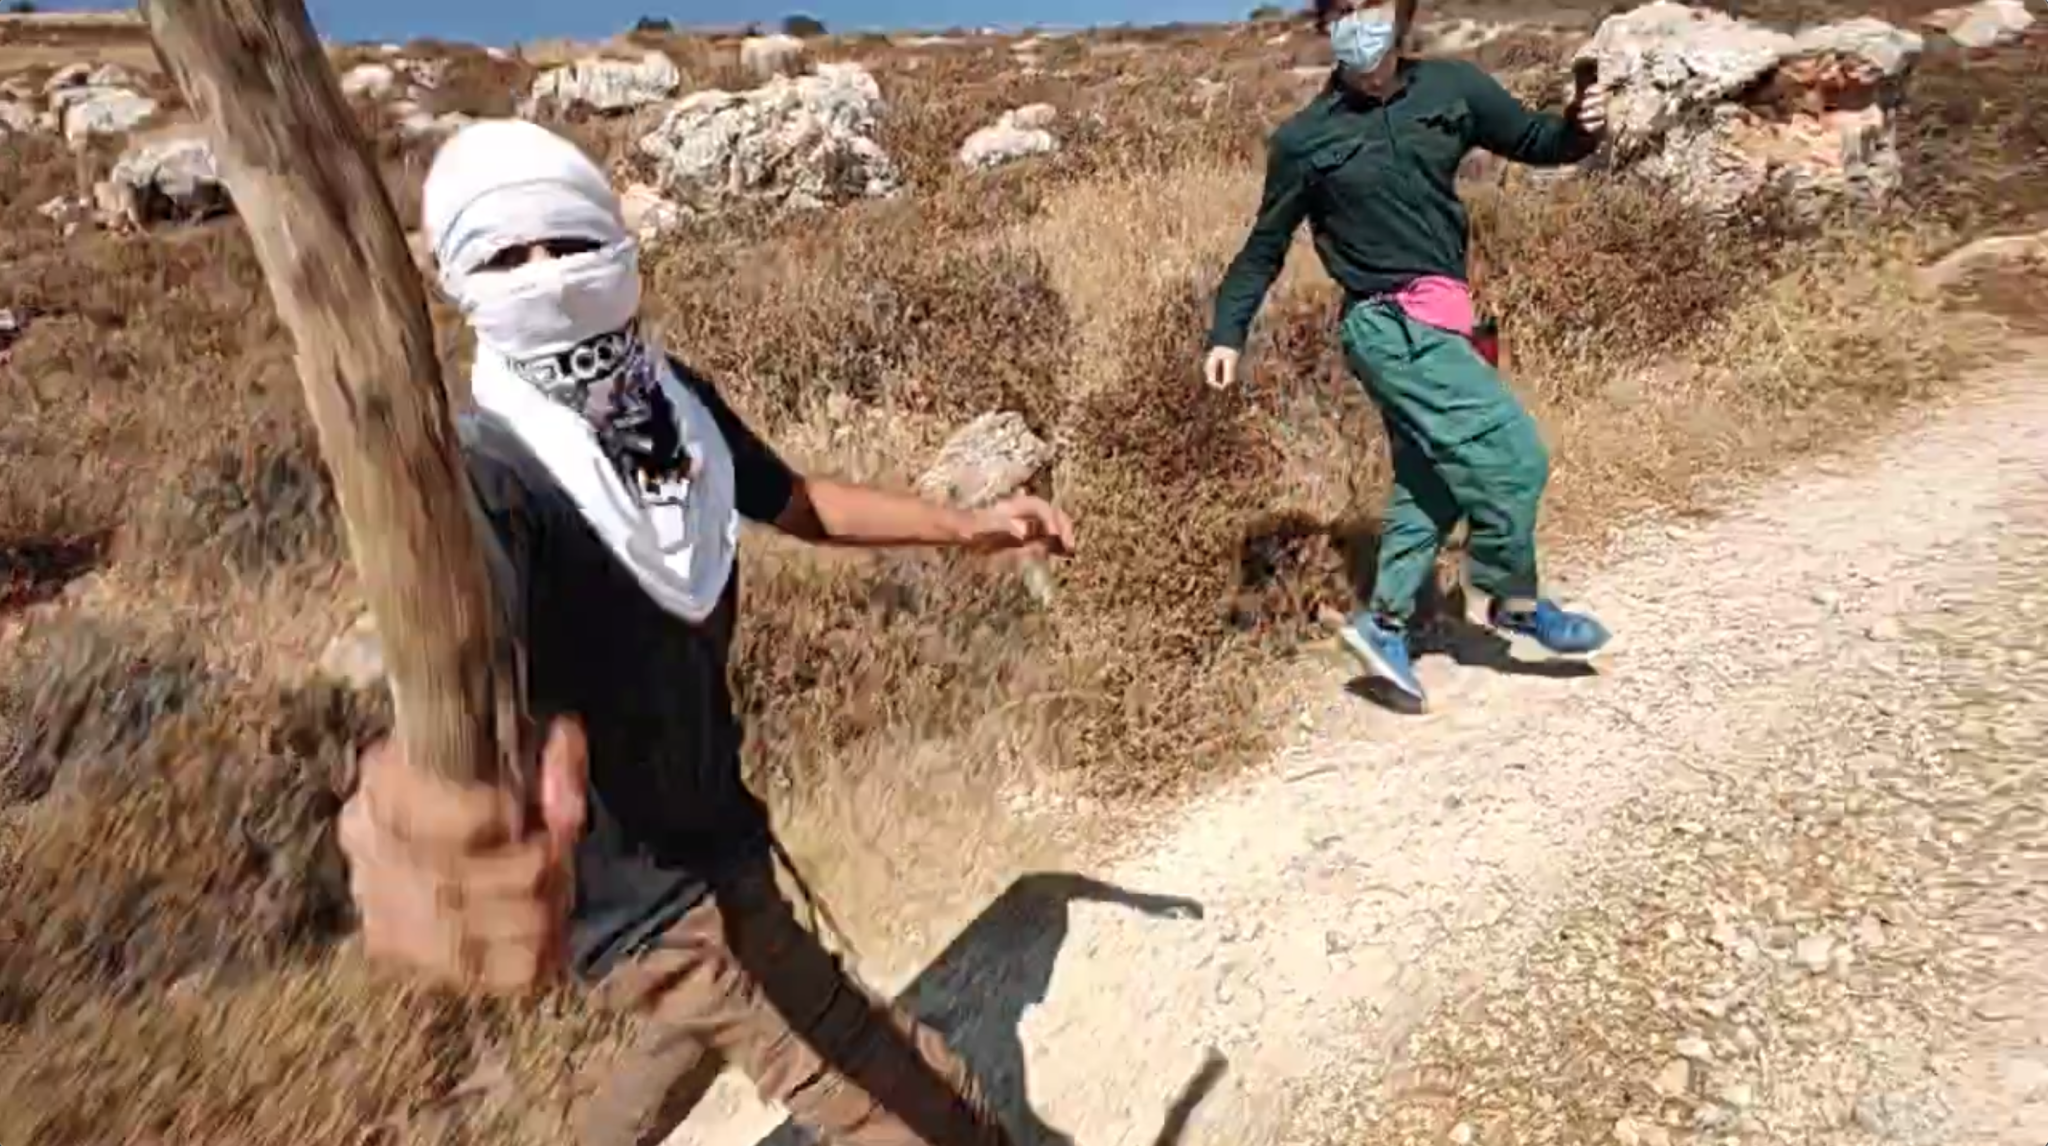 Video: West Bank settlers brutally attack Palestinians and American volunteers day after ICJ rules Israeli occupation illegal